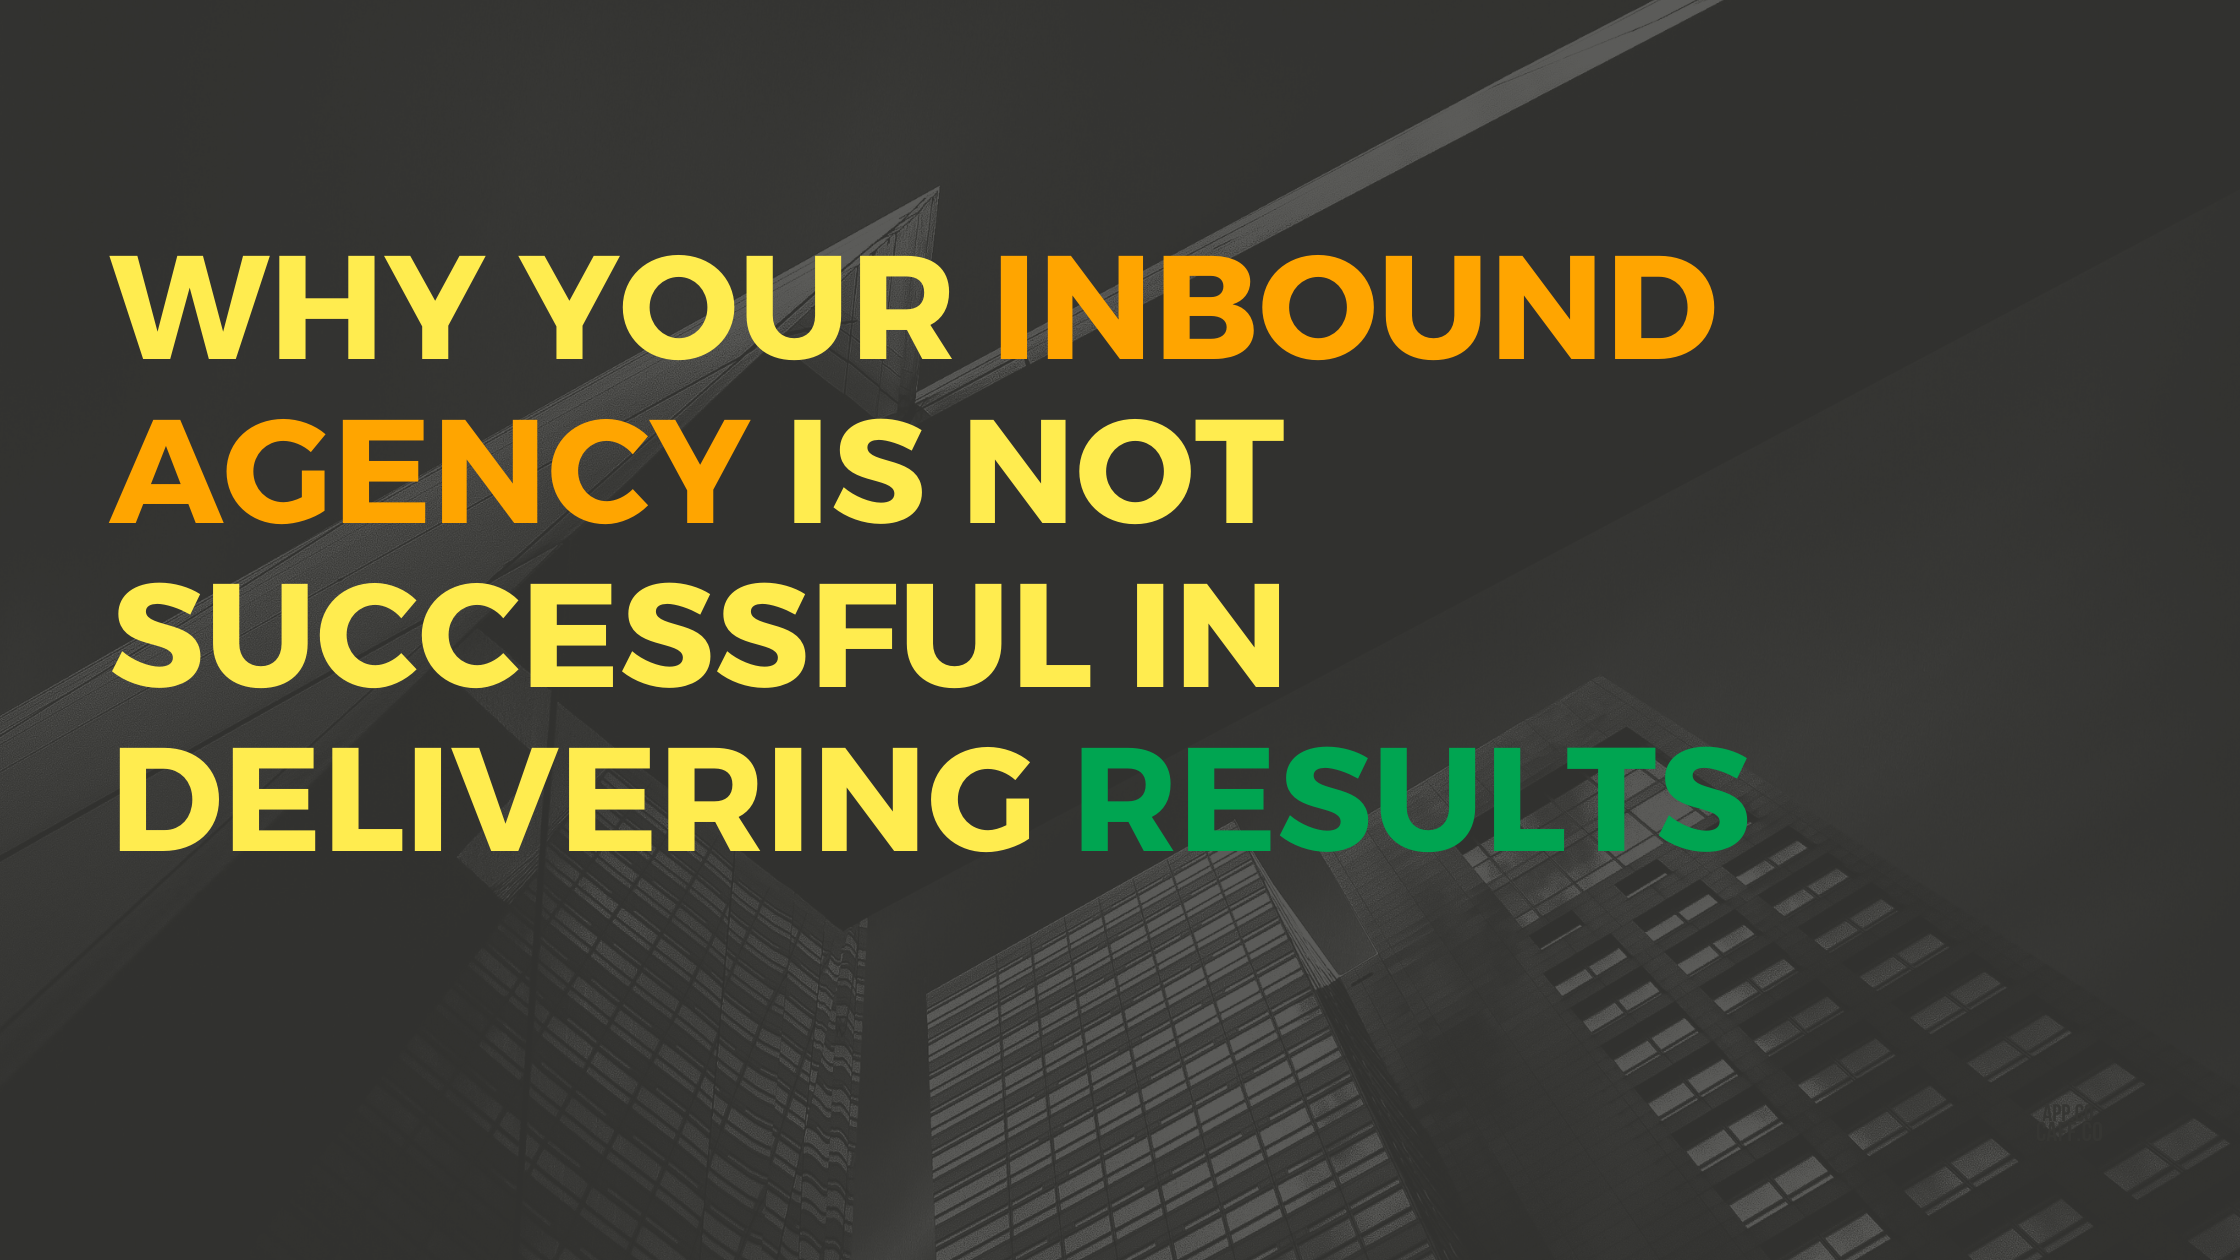 Why your inbound agency is not successful in delivering results